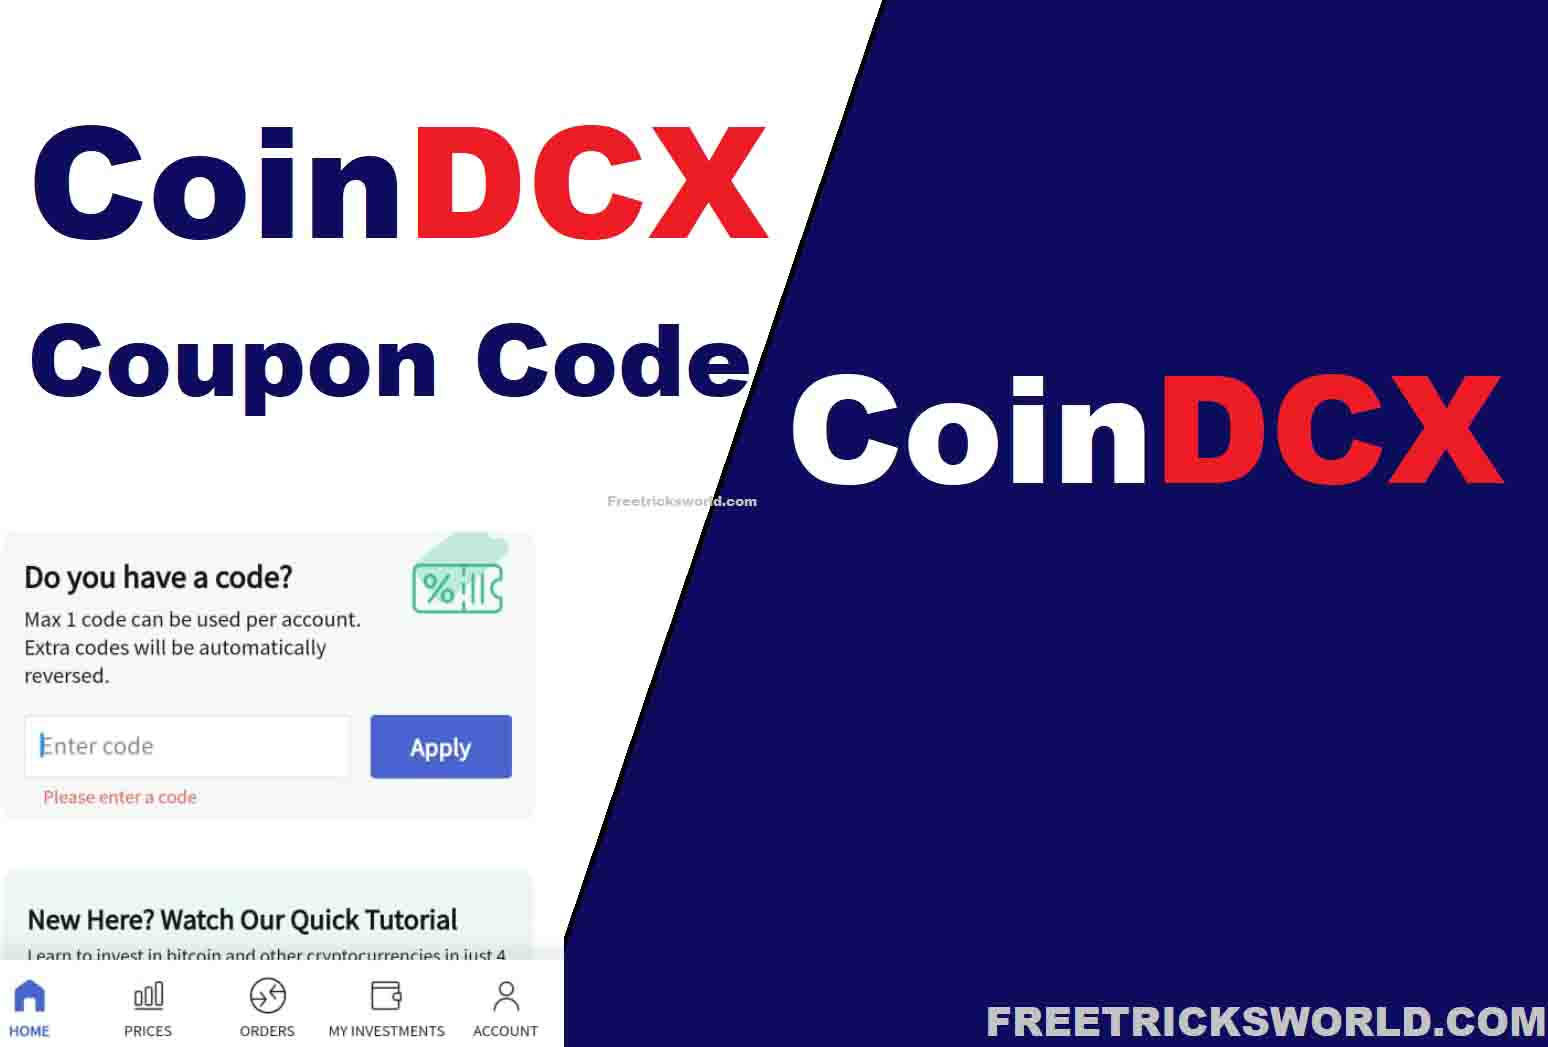 CoinDCX Coupon Code, Earn Free Bitcoin 2022(101% Working)